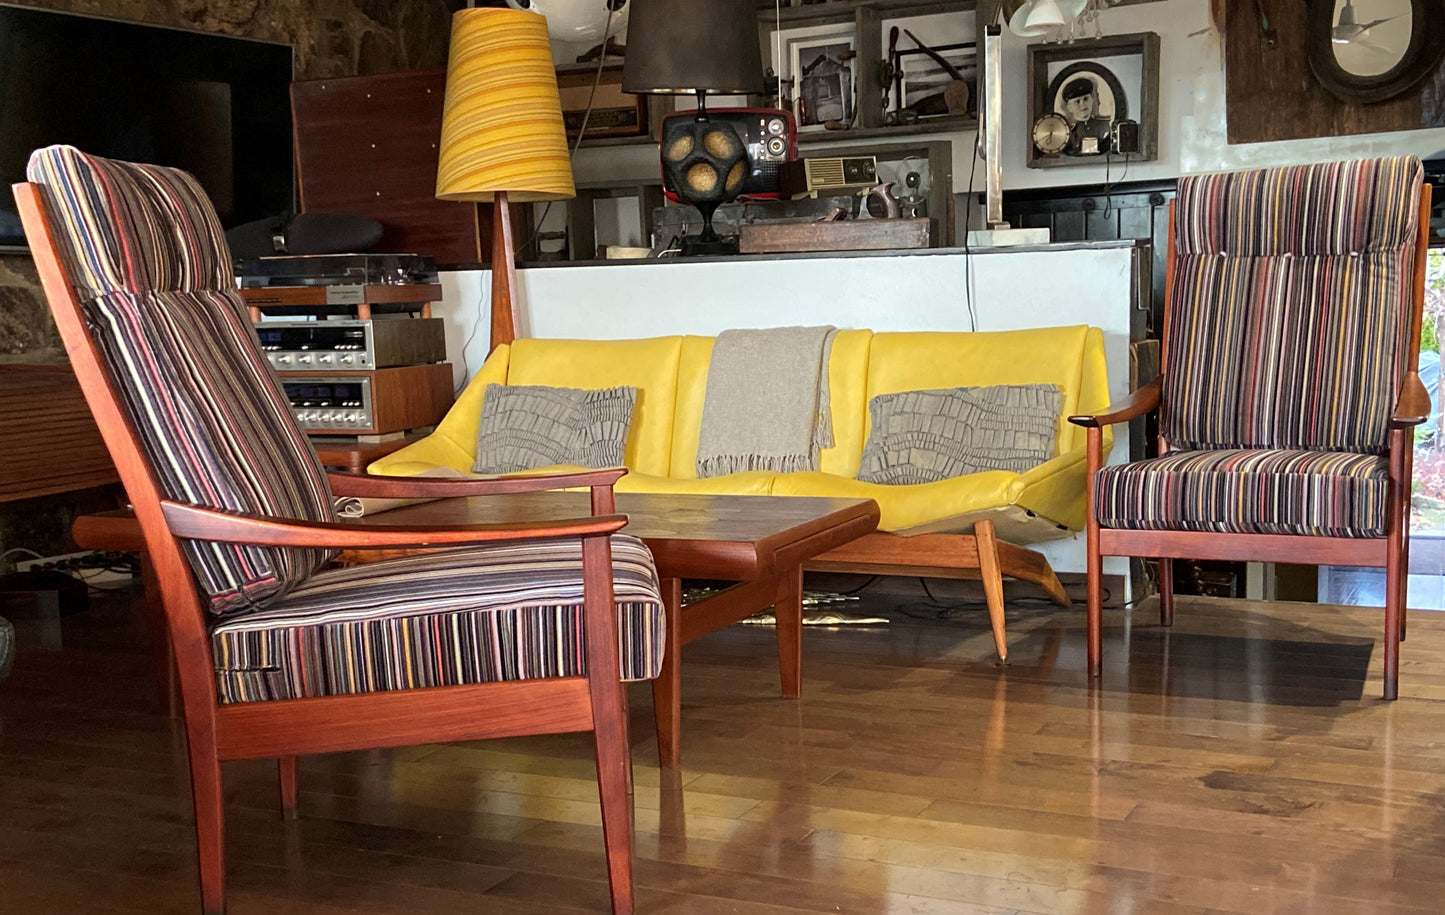 SALE***Set of 2 RESTORED REUPHOLSTERED MCM High Back Lounge Chairs by Casala in Maharam Paul Smith stripe